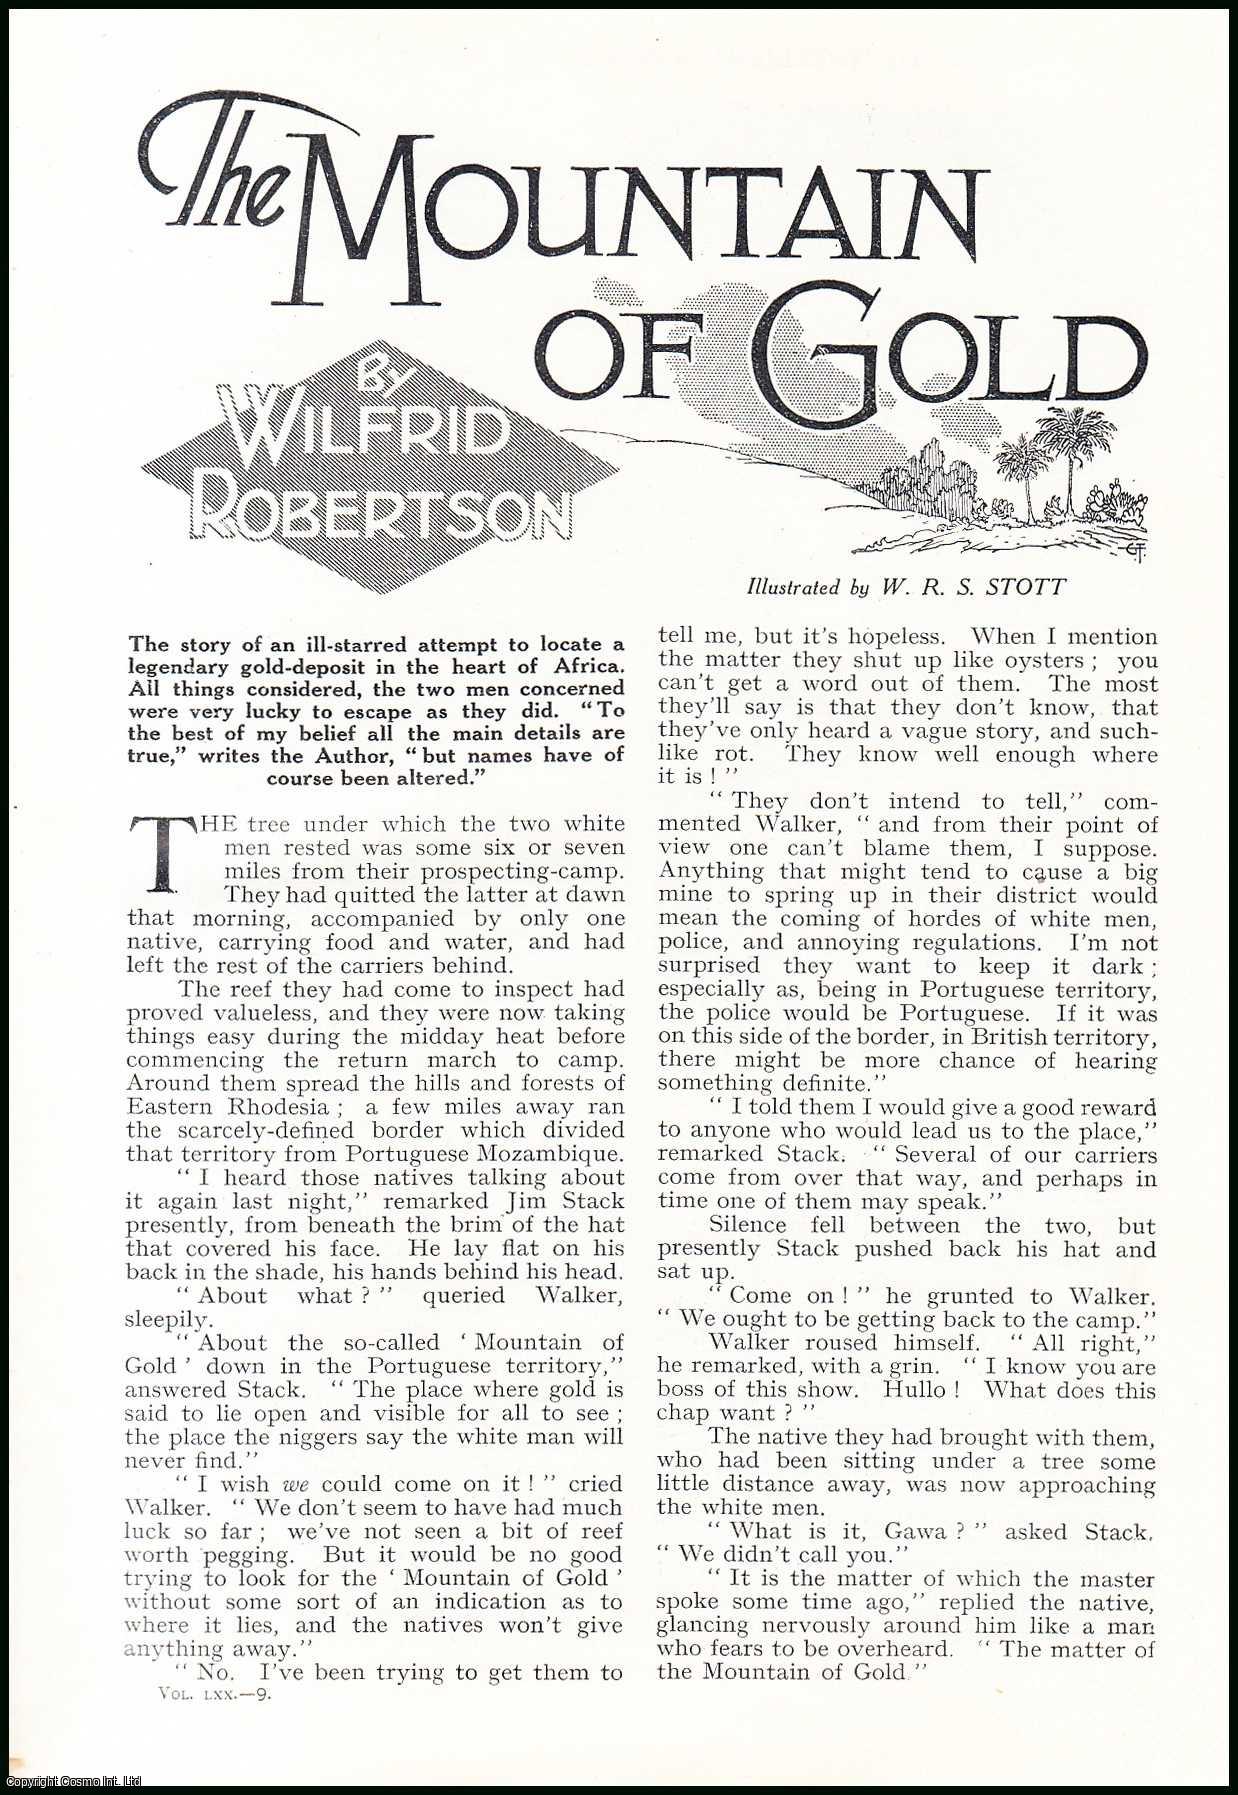 Wilfrid Roberton - The Mountain of Gold : an attempt to locate gold-deposit in Africa. An uncommon original article from the Wide World Magazine, 1932.